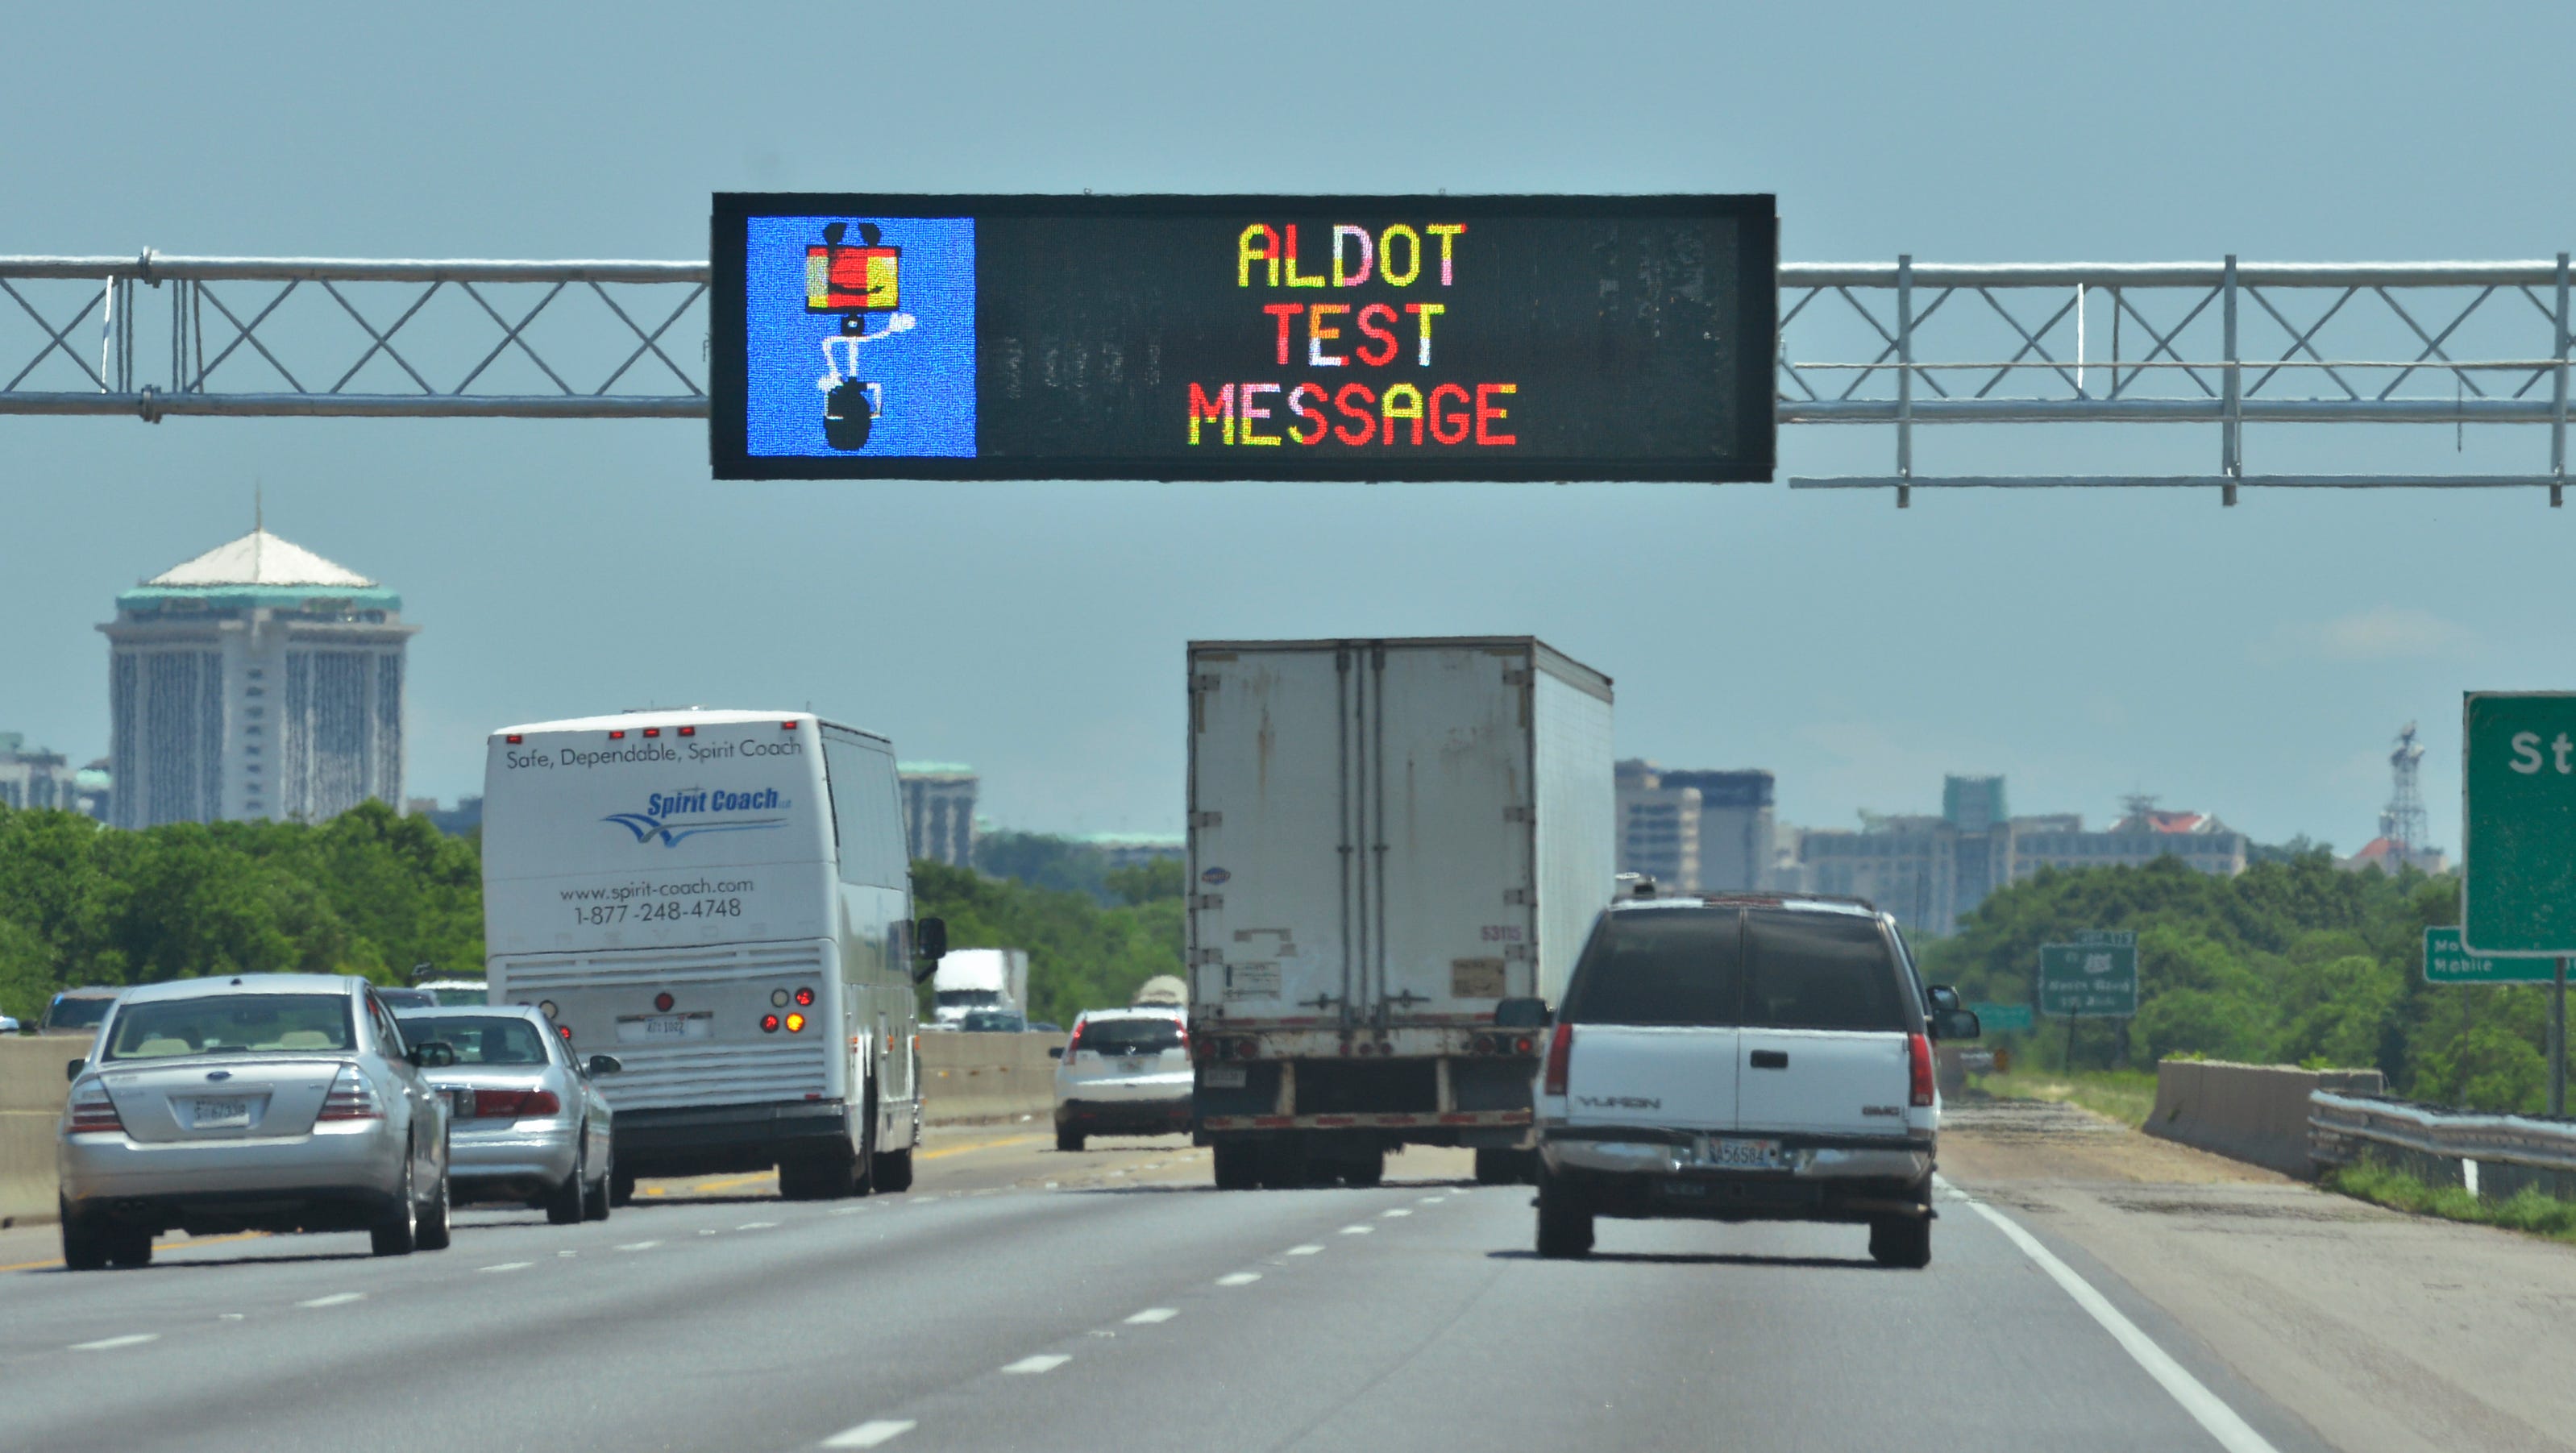 ALDOT testing signs on I-65 in Montgomery